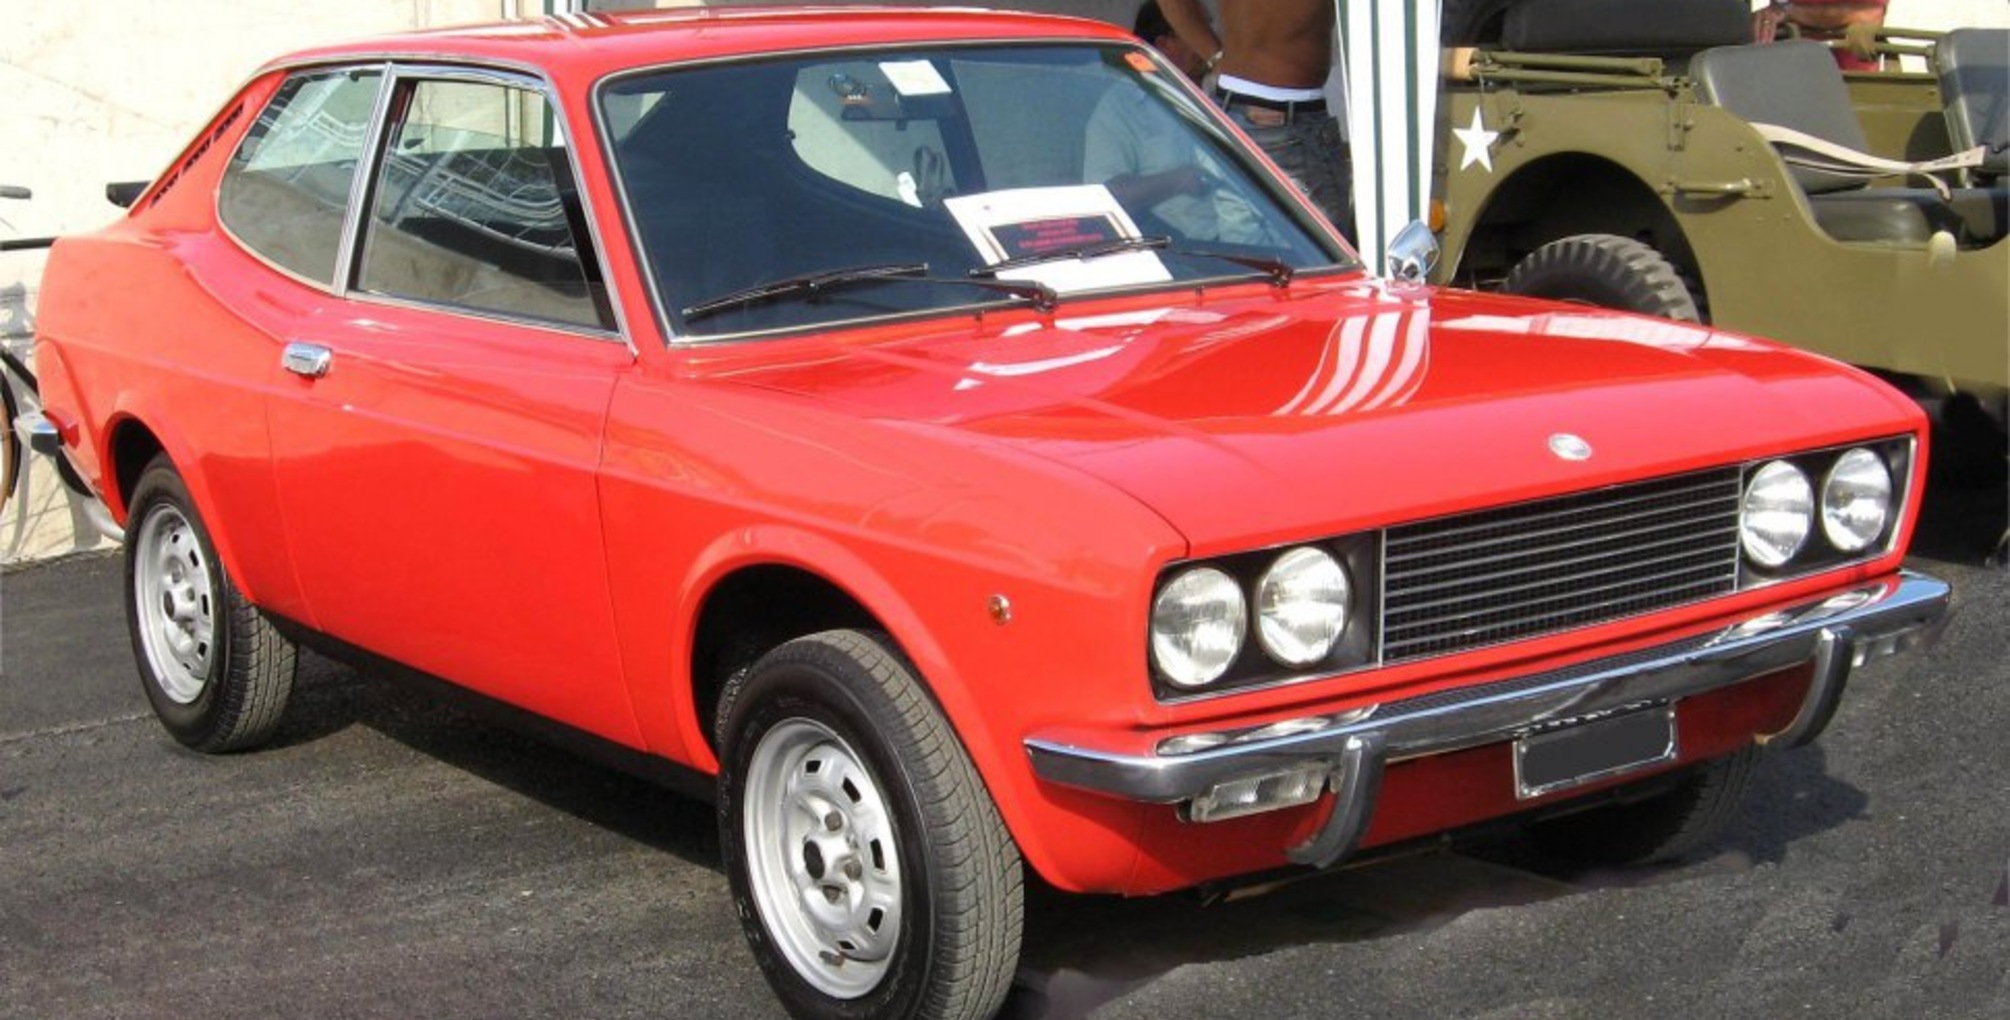 Fiat 128 Coupe 1.3 (AC) (75 Hp) 1972, 1973, 1974, 1975, 1976, 1977, 1978, 1979 